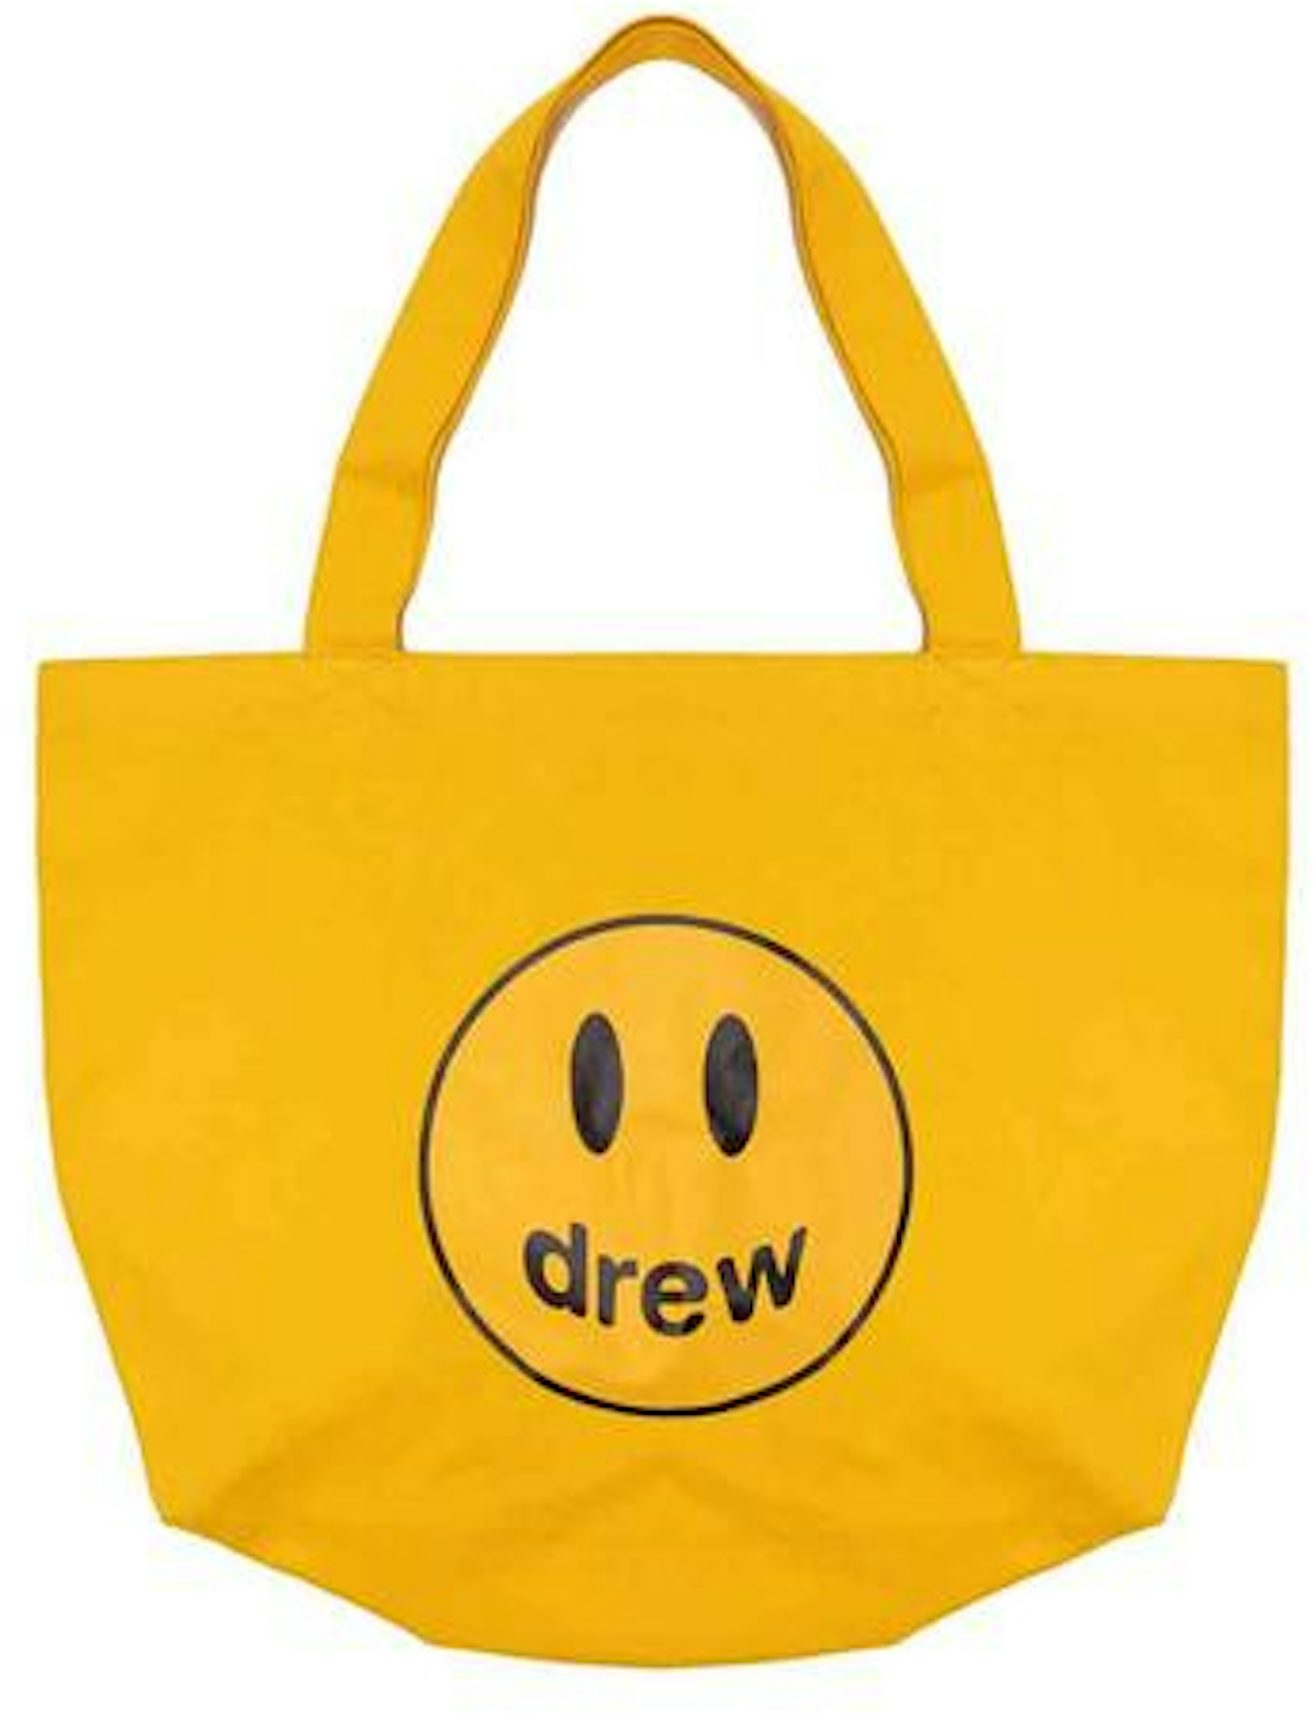 NWT Drew House Smiley Face Slippers Yellow Black Men S/M Justin Bieber  AUTHENTIC